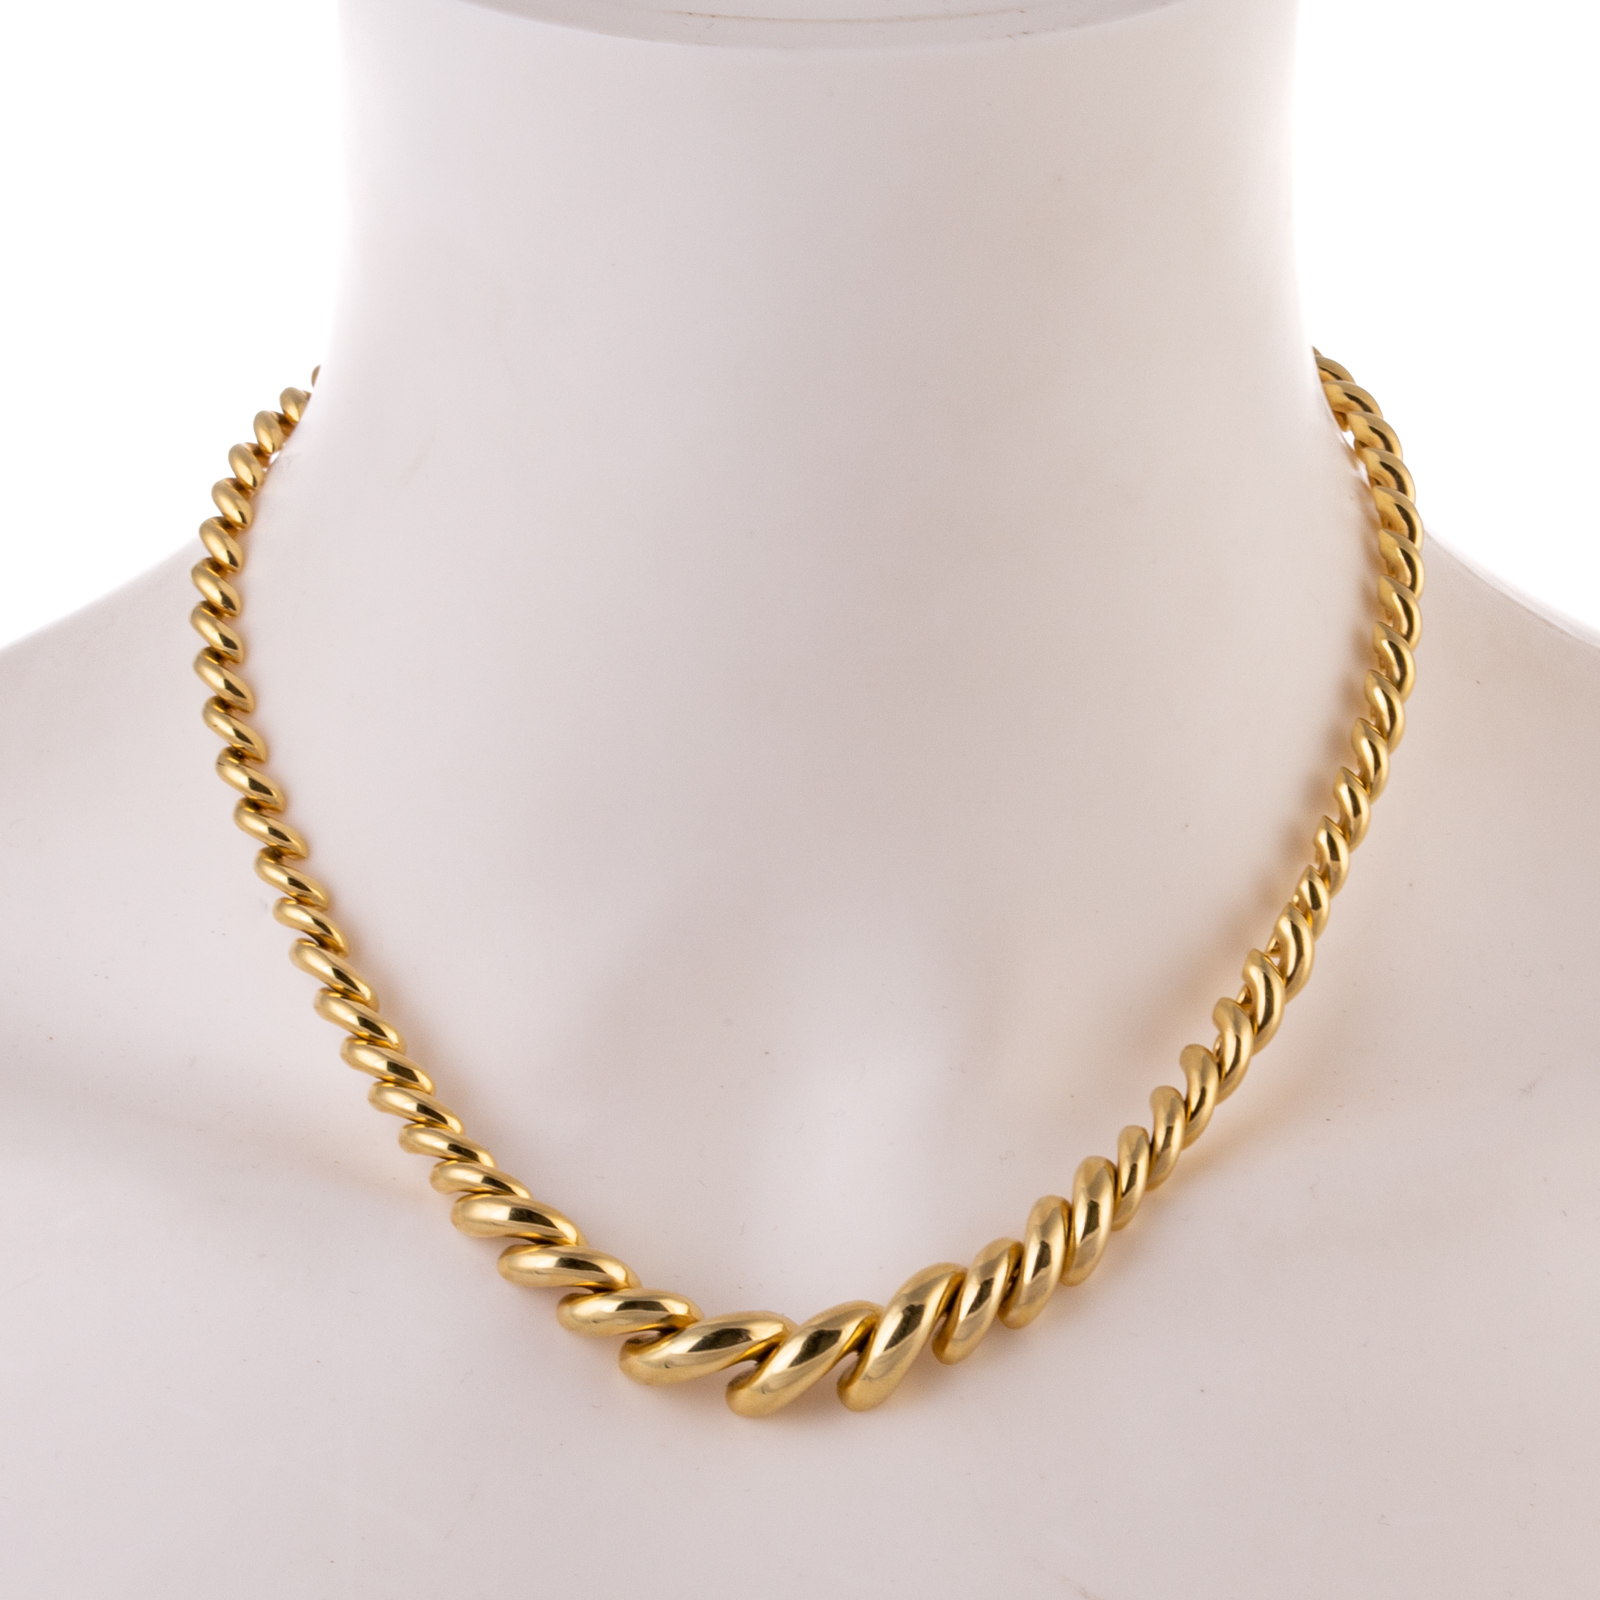 A SAN MARCO NECKLACE IN 14K YELLOW